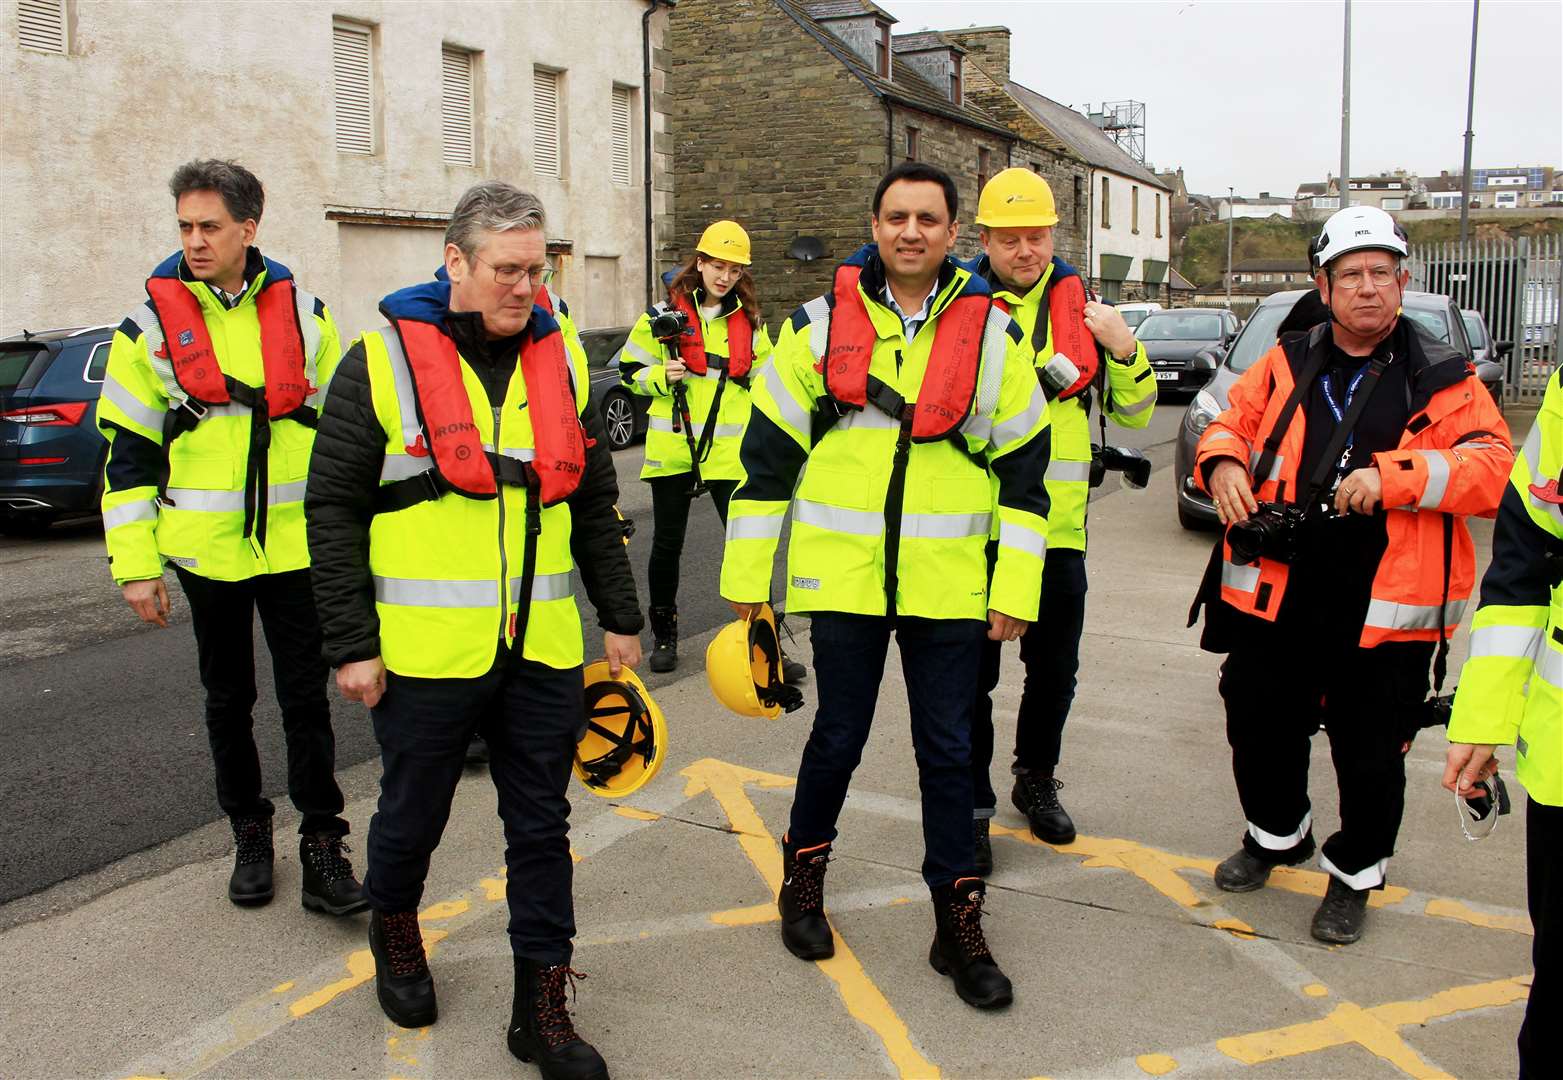 Anas Sarwar (centre) with Ed Miliband, Sir Keir Starmer and others on their way to a crew transfer vessel for a trip to the Beatrice offshore wind farm on Friday. Picture: Alan Hendry